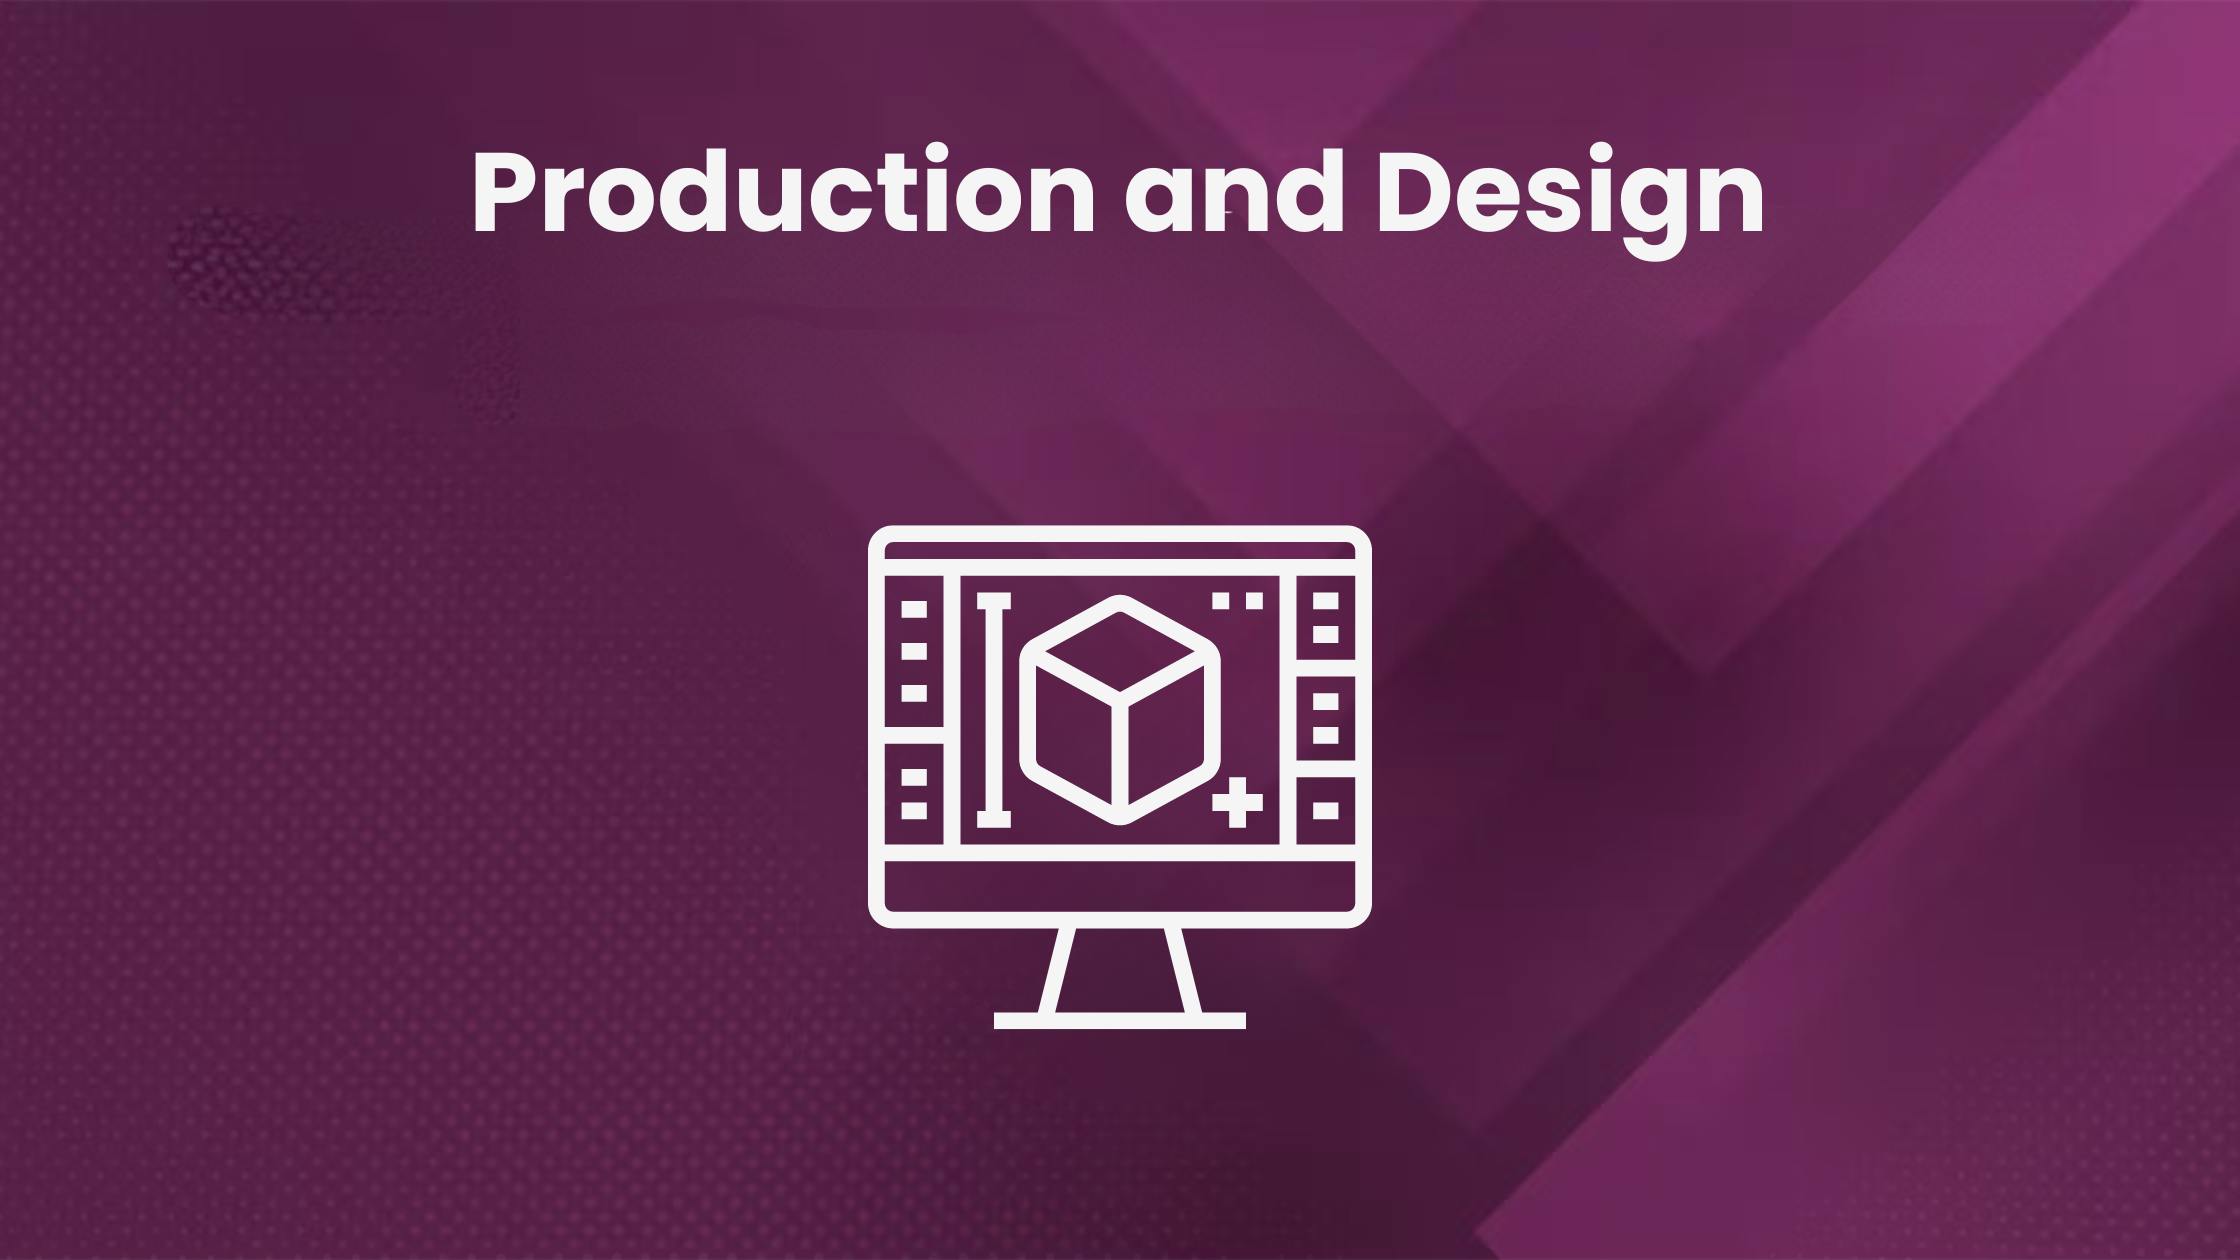 Production and design